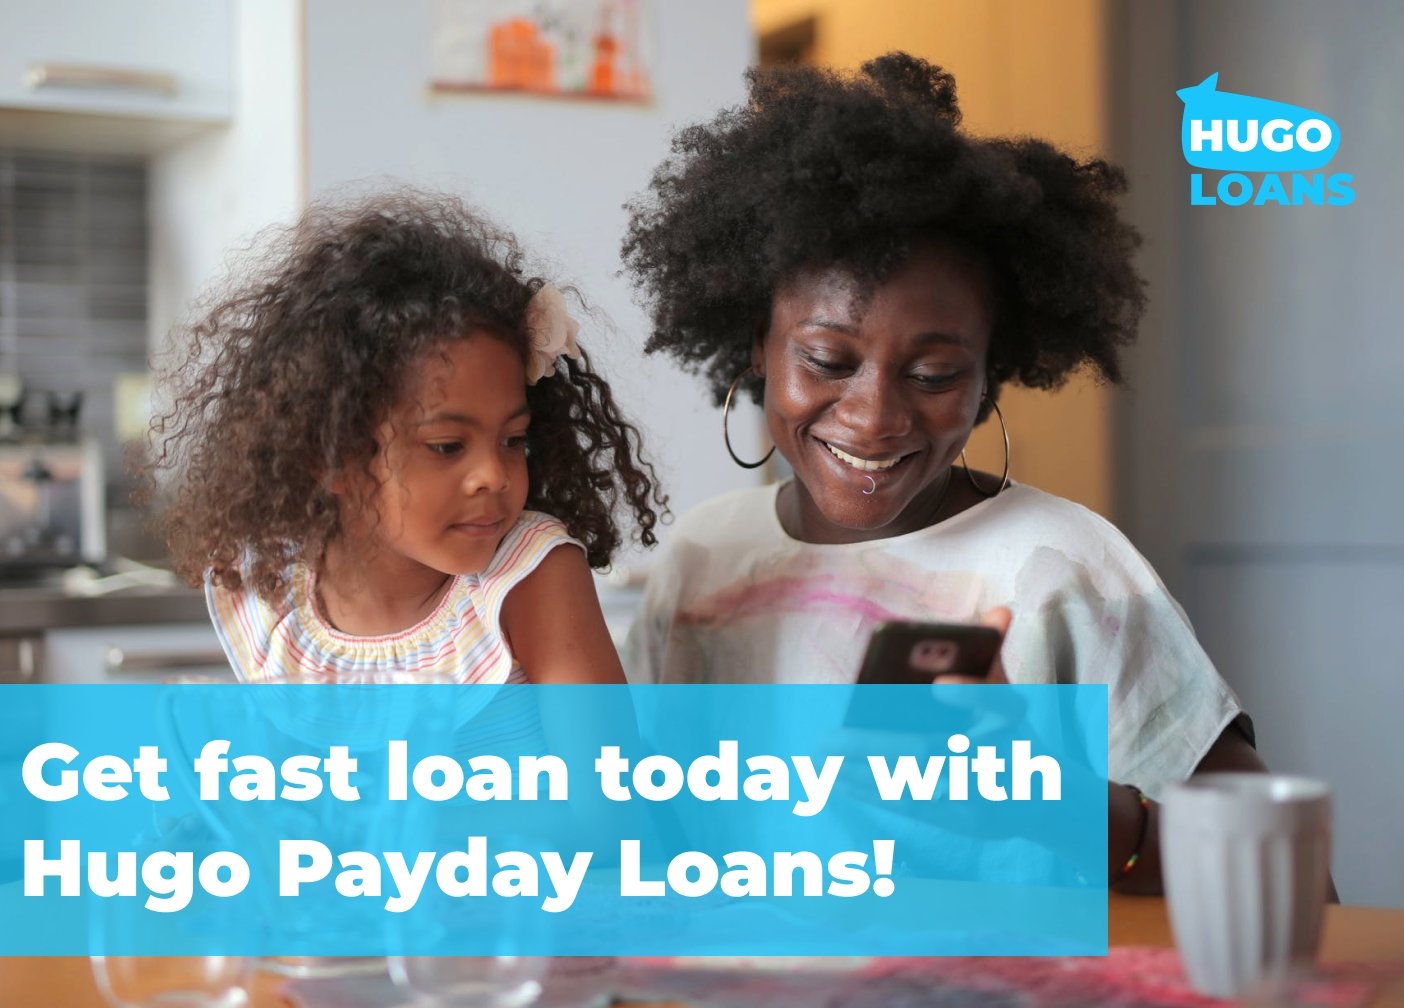 Hugo Payday Loans cover